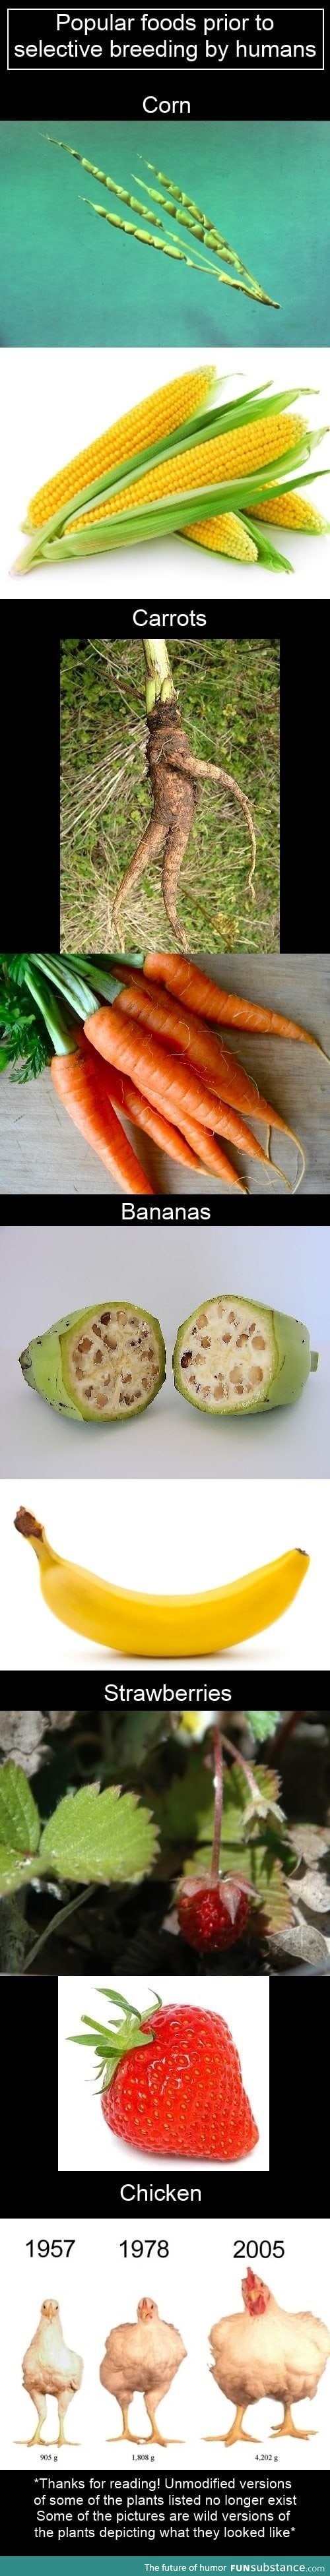 What foods used to look like before selective breeding by humans